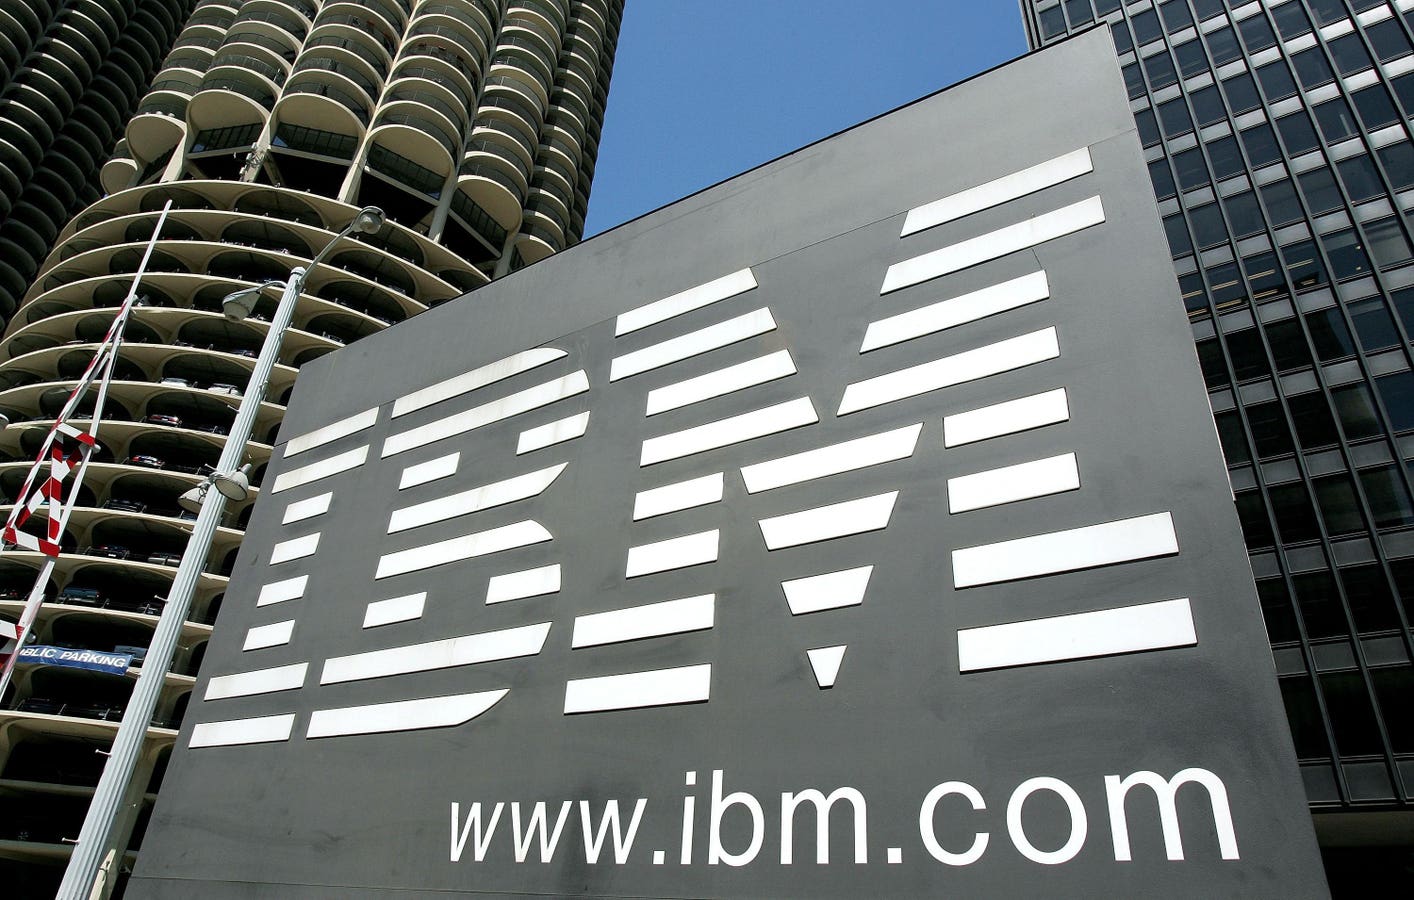 IBM Bolsters Hybrid-Cloud Business With $6.4B HashiCorp Acquisition